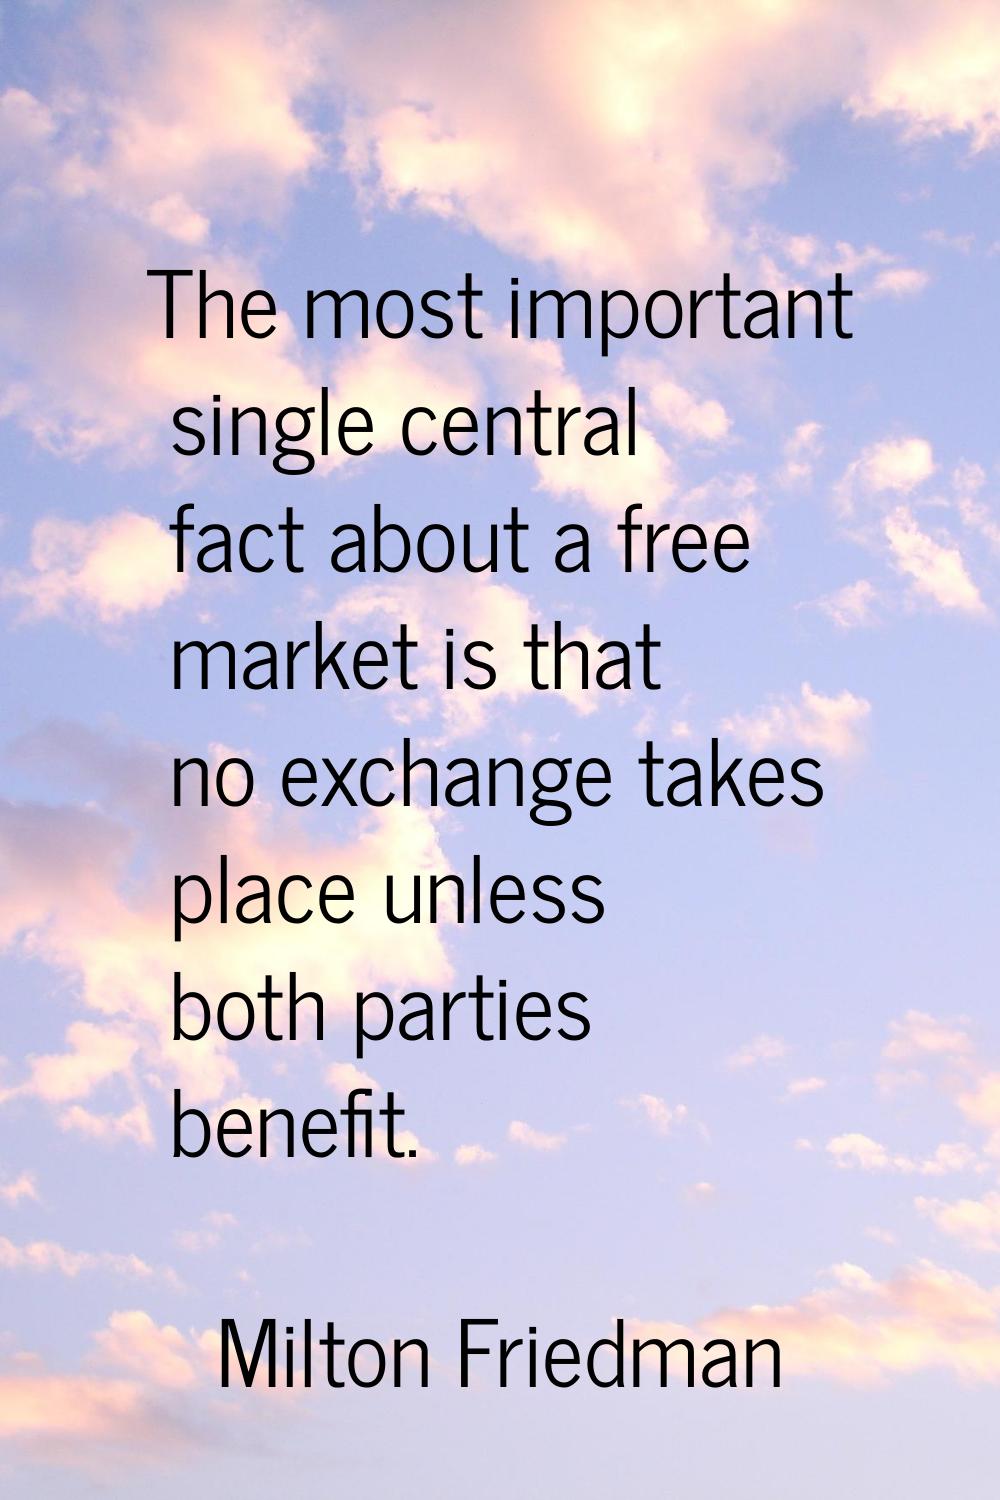 The most important single central fact about a free market is that no exchange takes place unless b